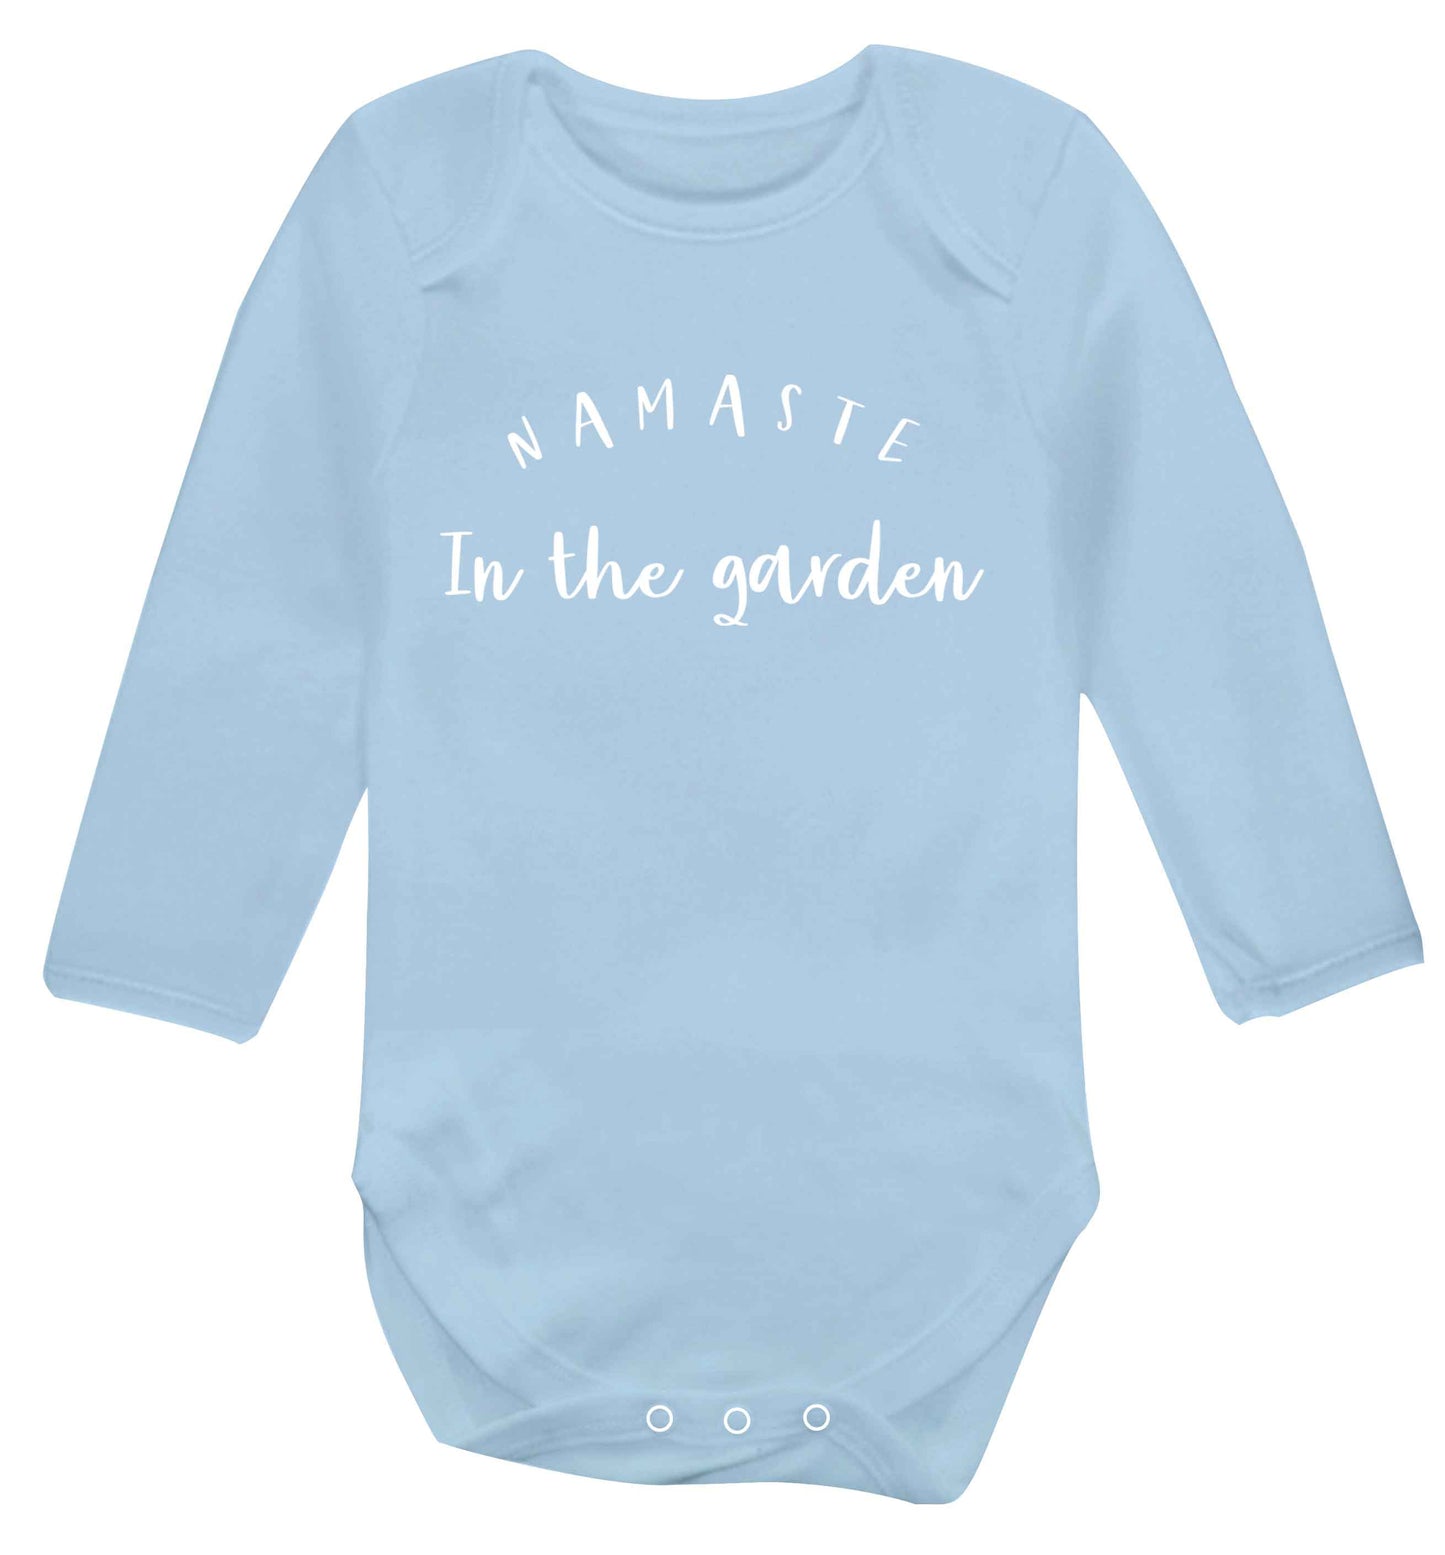 Namaste in the garden Baby Vest long sleeved pale blue 6-12 months